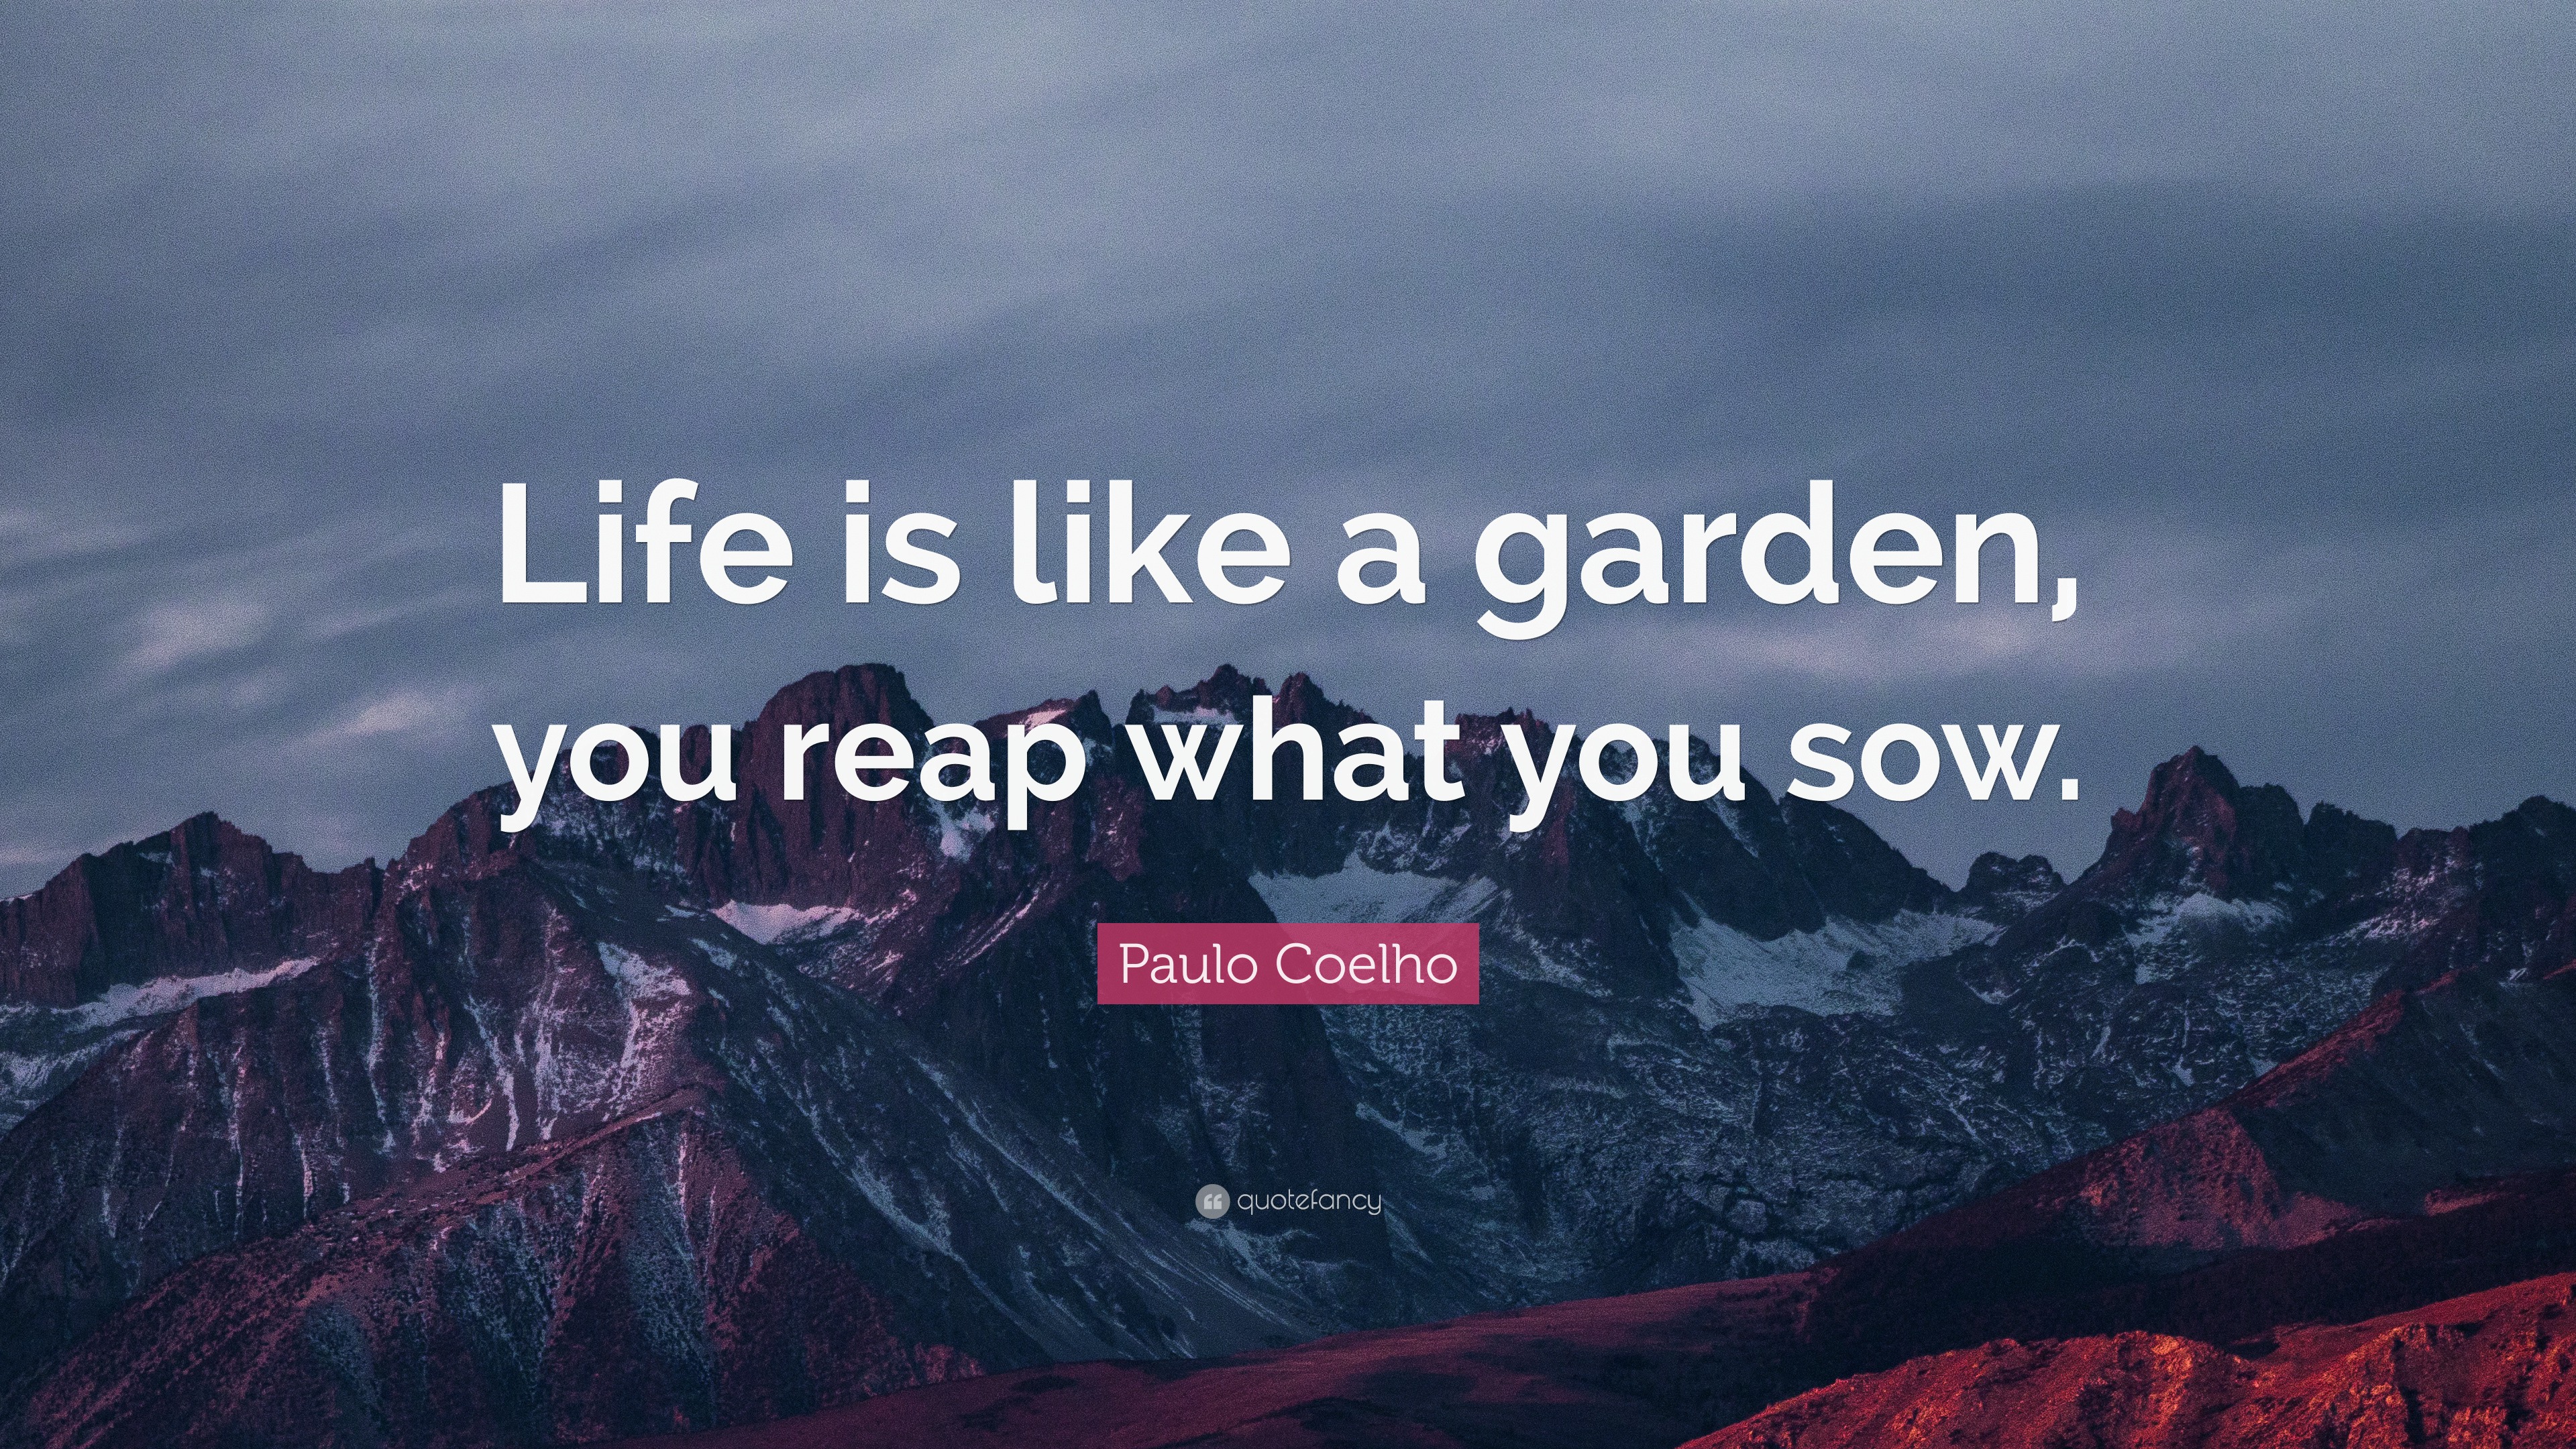 Paulo Coelho Quote Life Is Like A Garden You Reap What